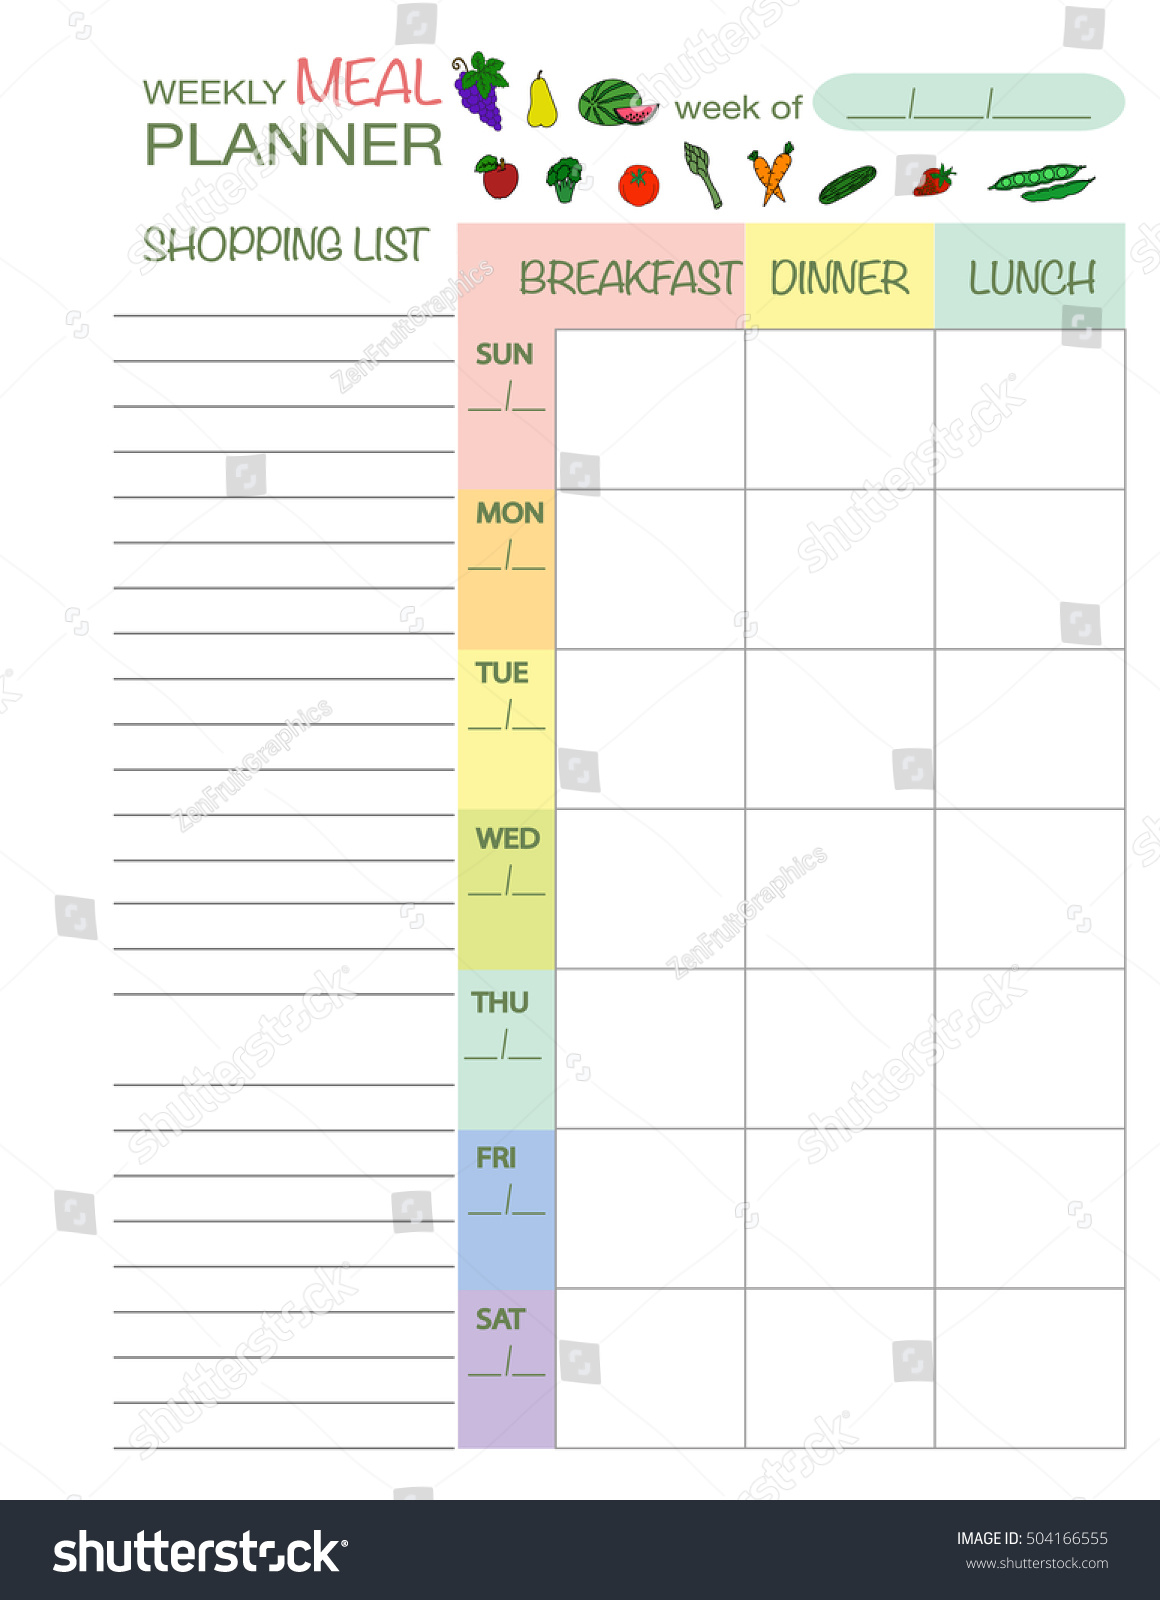 Weekly Menu Planner Template from image.shutterstock.com